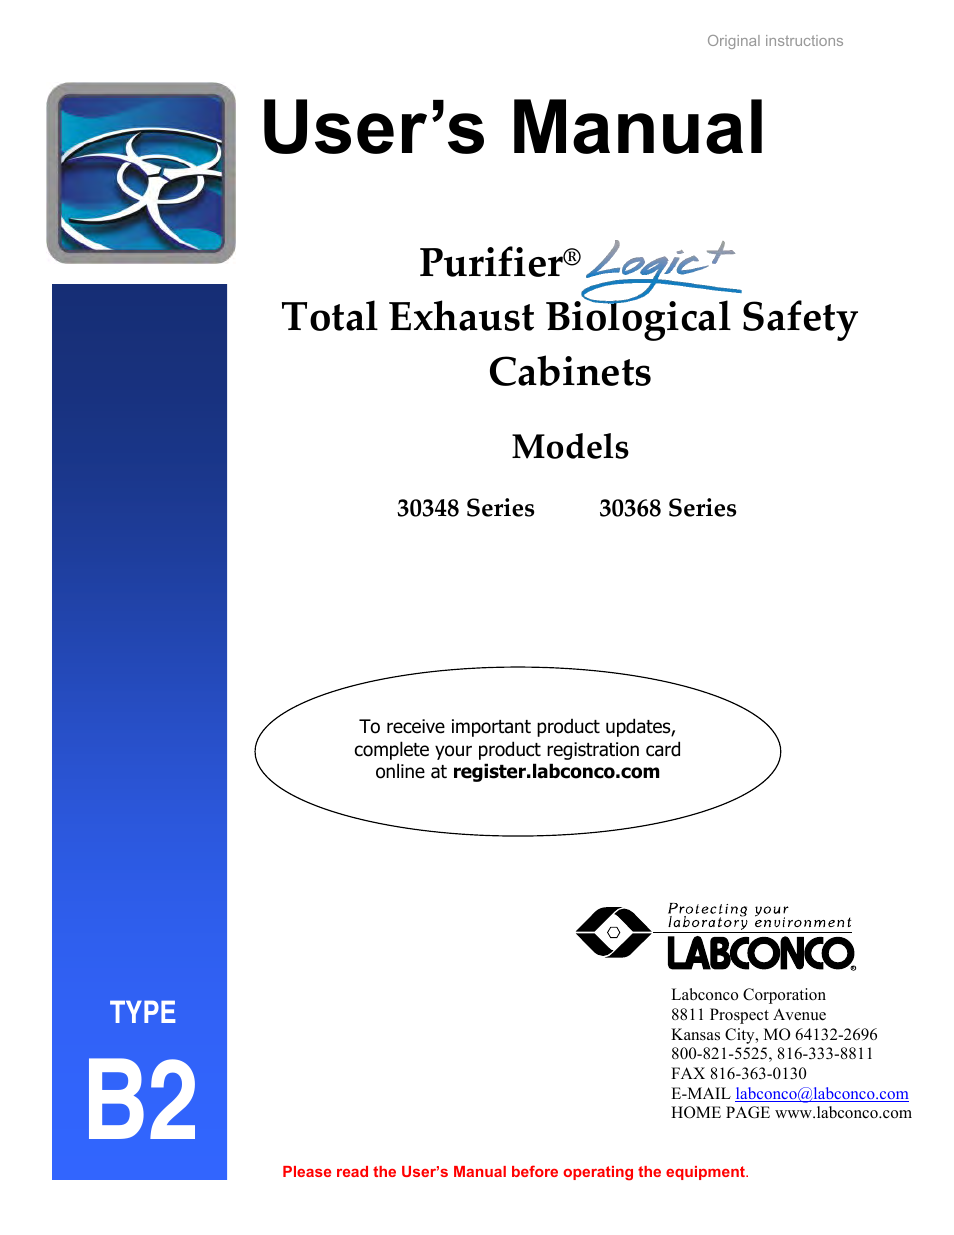 Total Exhaust Biological Safety Cabinets 30368 Series